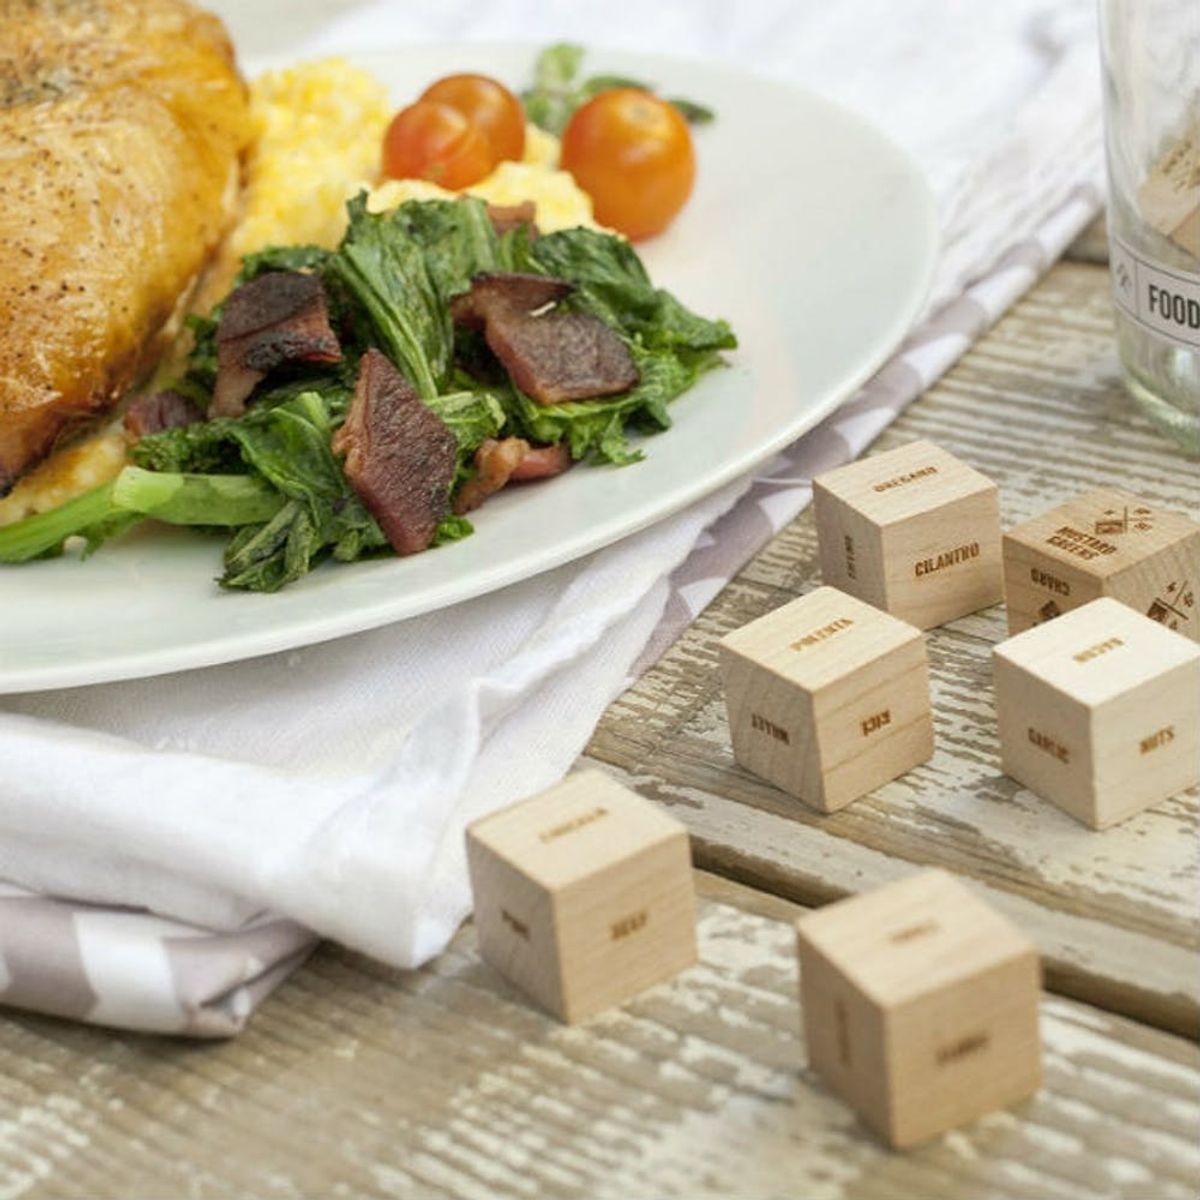 This Company Wants to Help You Play With Your Food